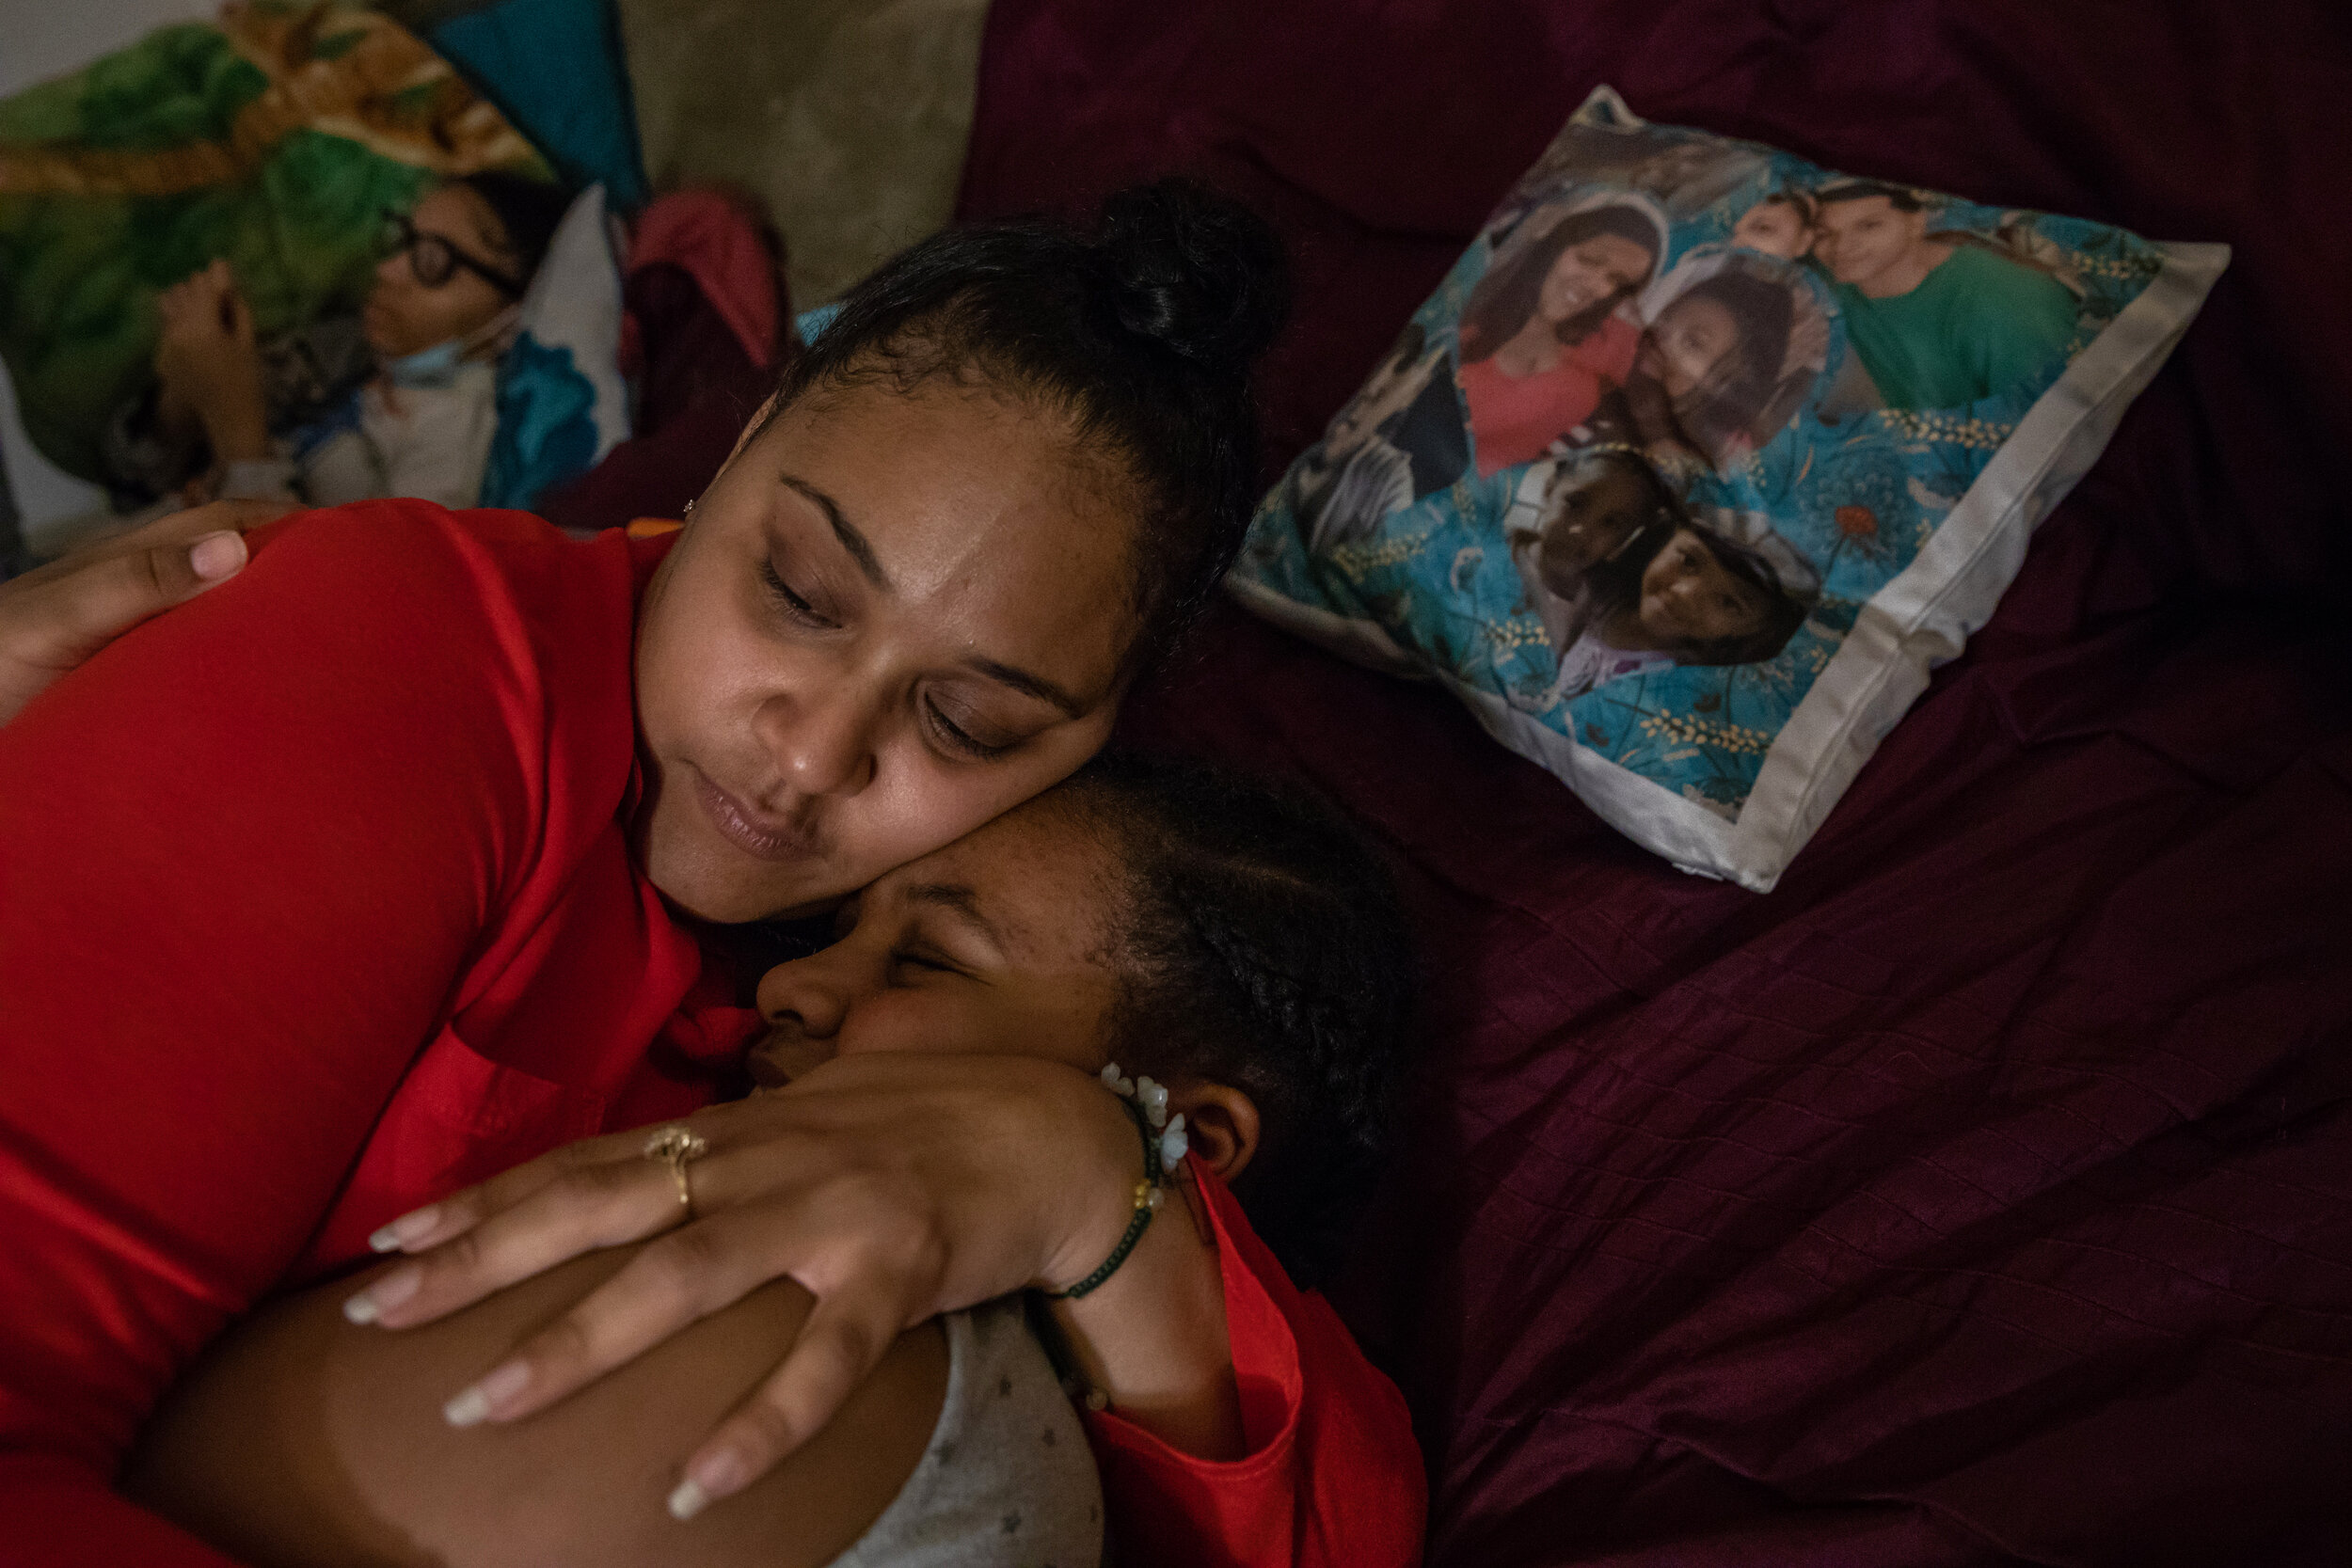  Nawaal Walker embraces her daughter, Ca'leah, in their home in Durham, North Carolina, on Dec. 6, 2020. The global COVID-19 pandemic has exacerbated and magnified the eviction crisis, especially for women of color. (For  HuffPost ) 